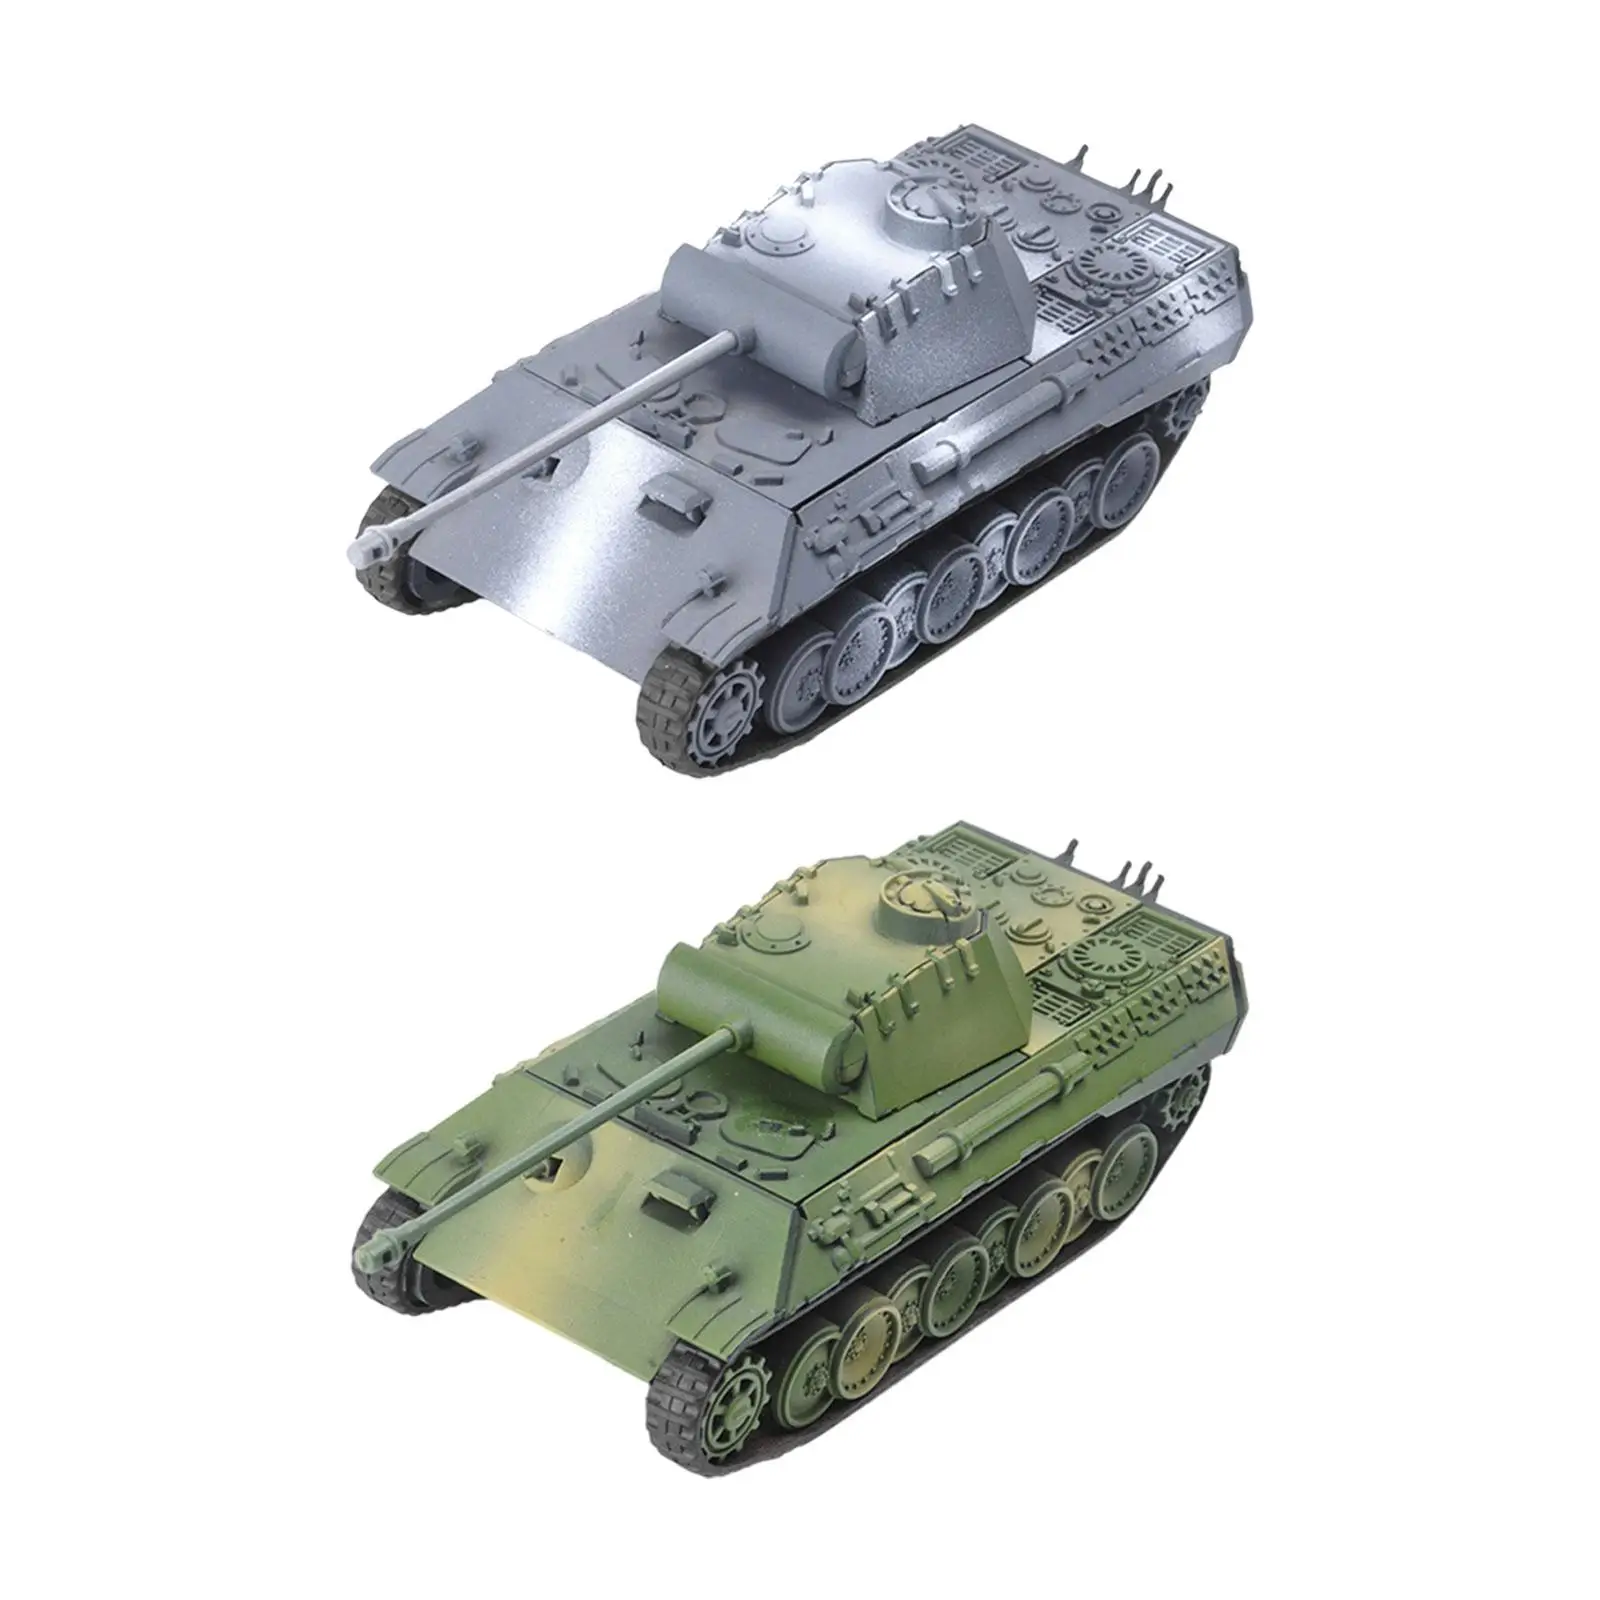 1:72 Scale 4D Tank Model DIY Assemble Simulation Tabletop Decor Educational Toys Vehicle Tank Model Toy Collection for Boy